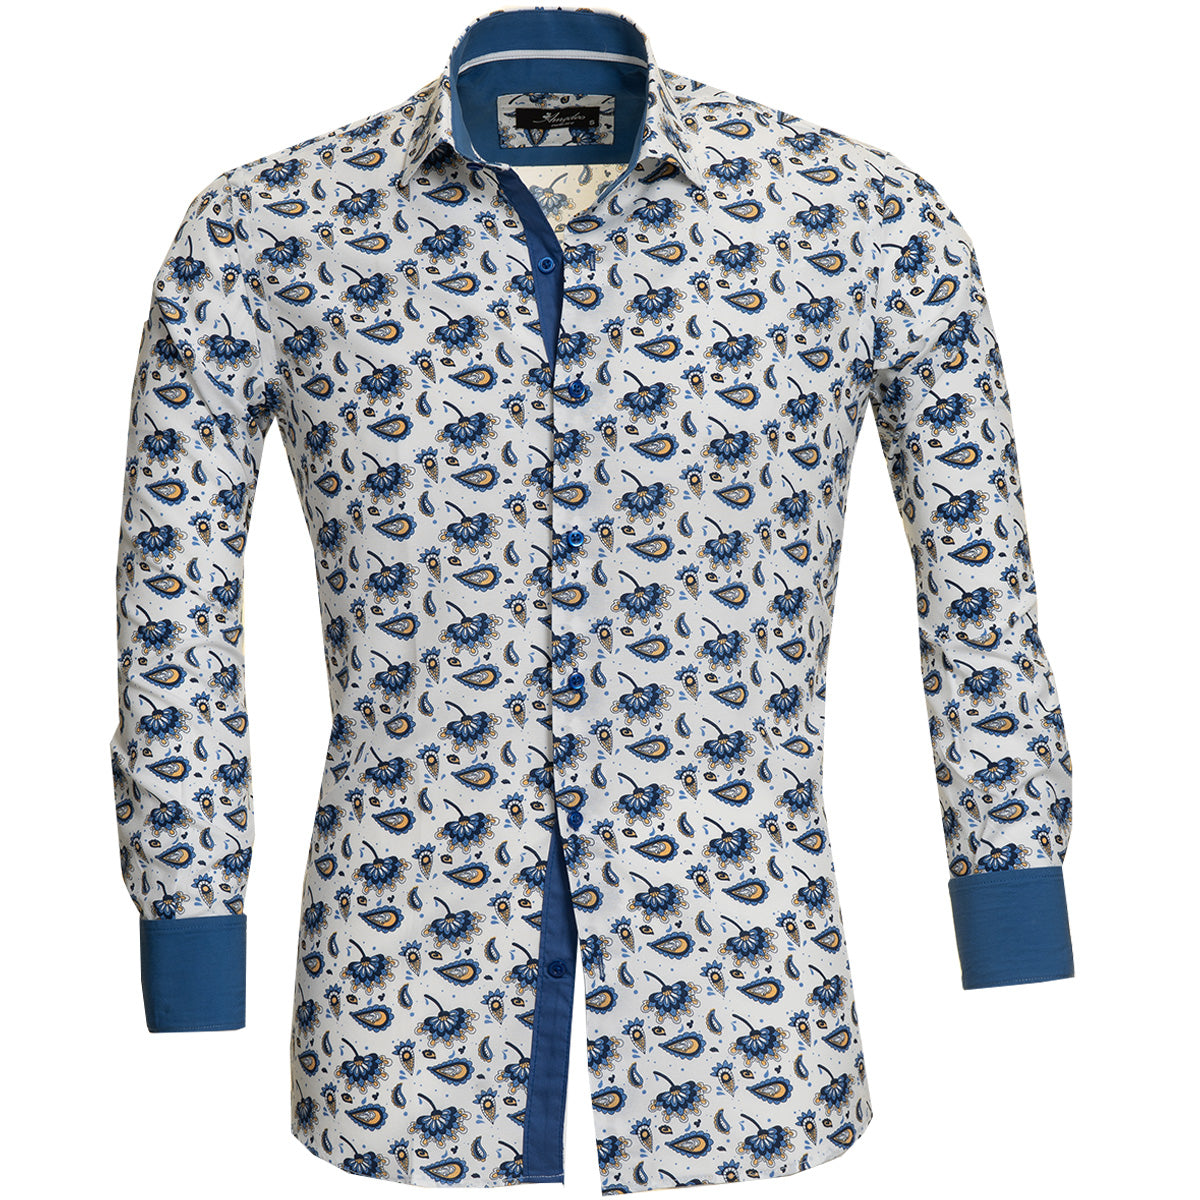 Blue Paisley Mens Slim Fit Designer Dress Shirt - Tailored Cotton Shirts For Work And Casual